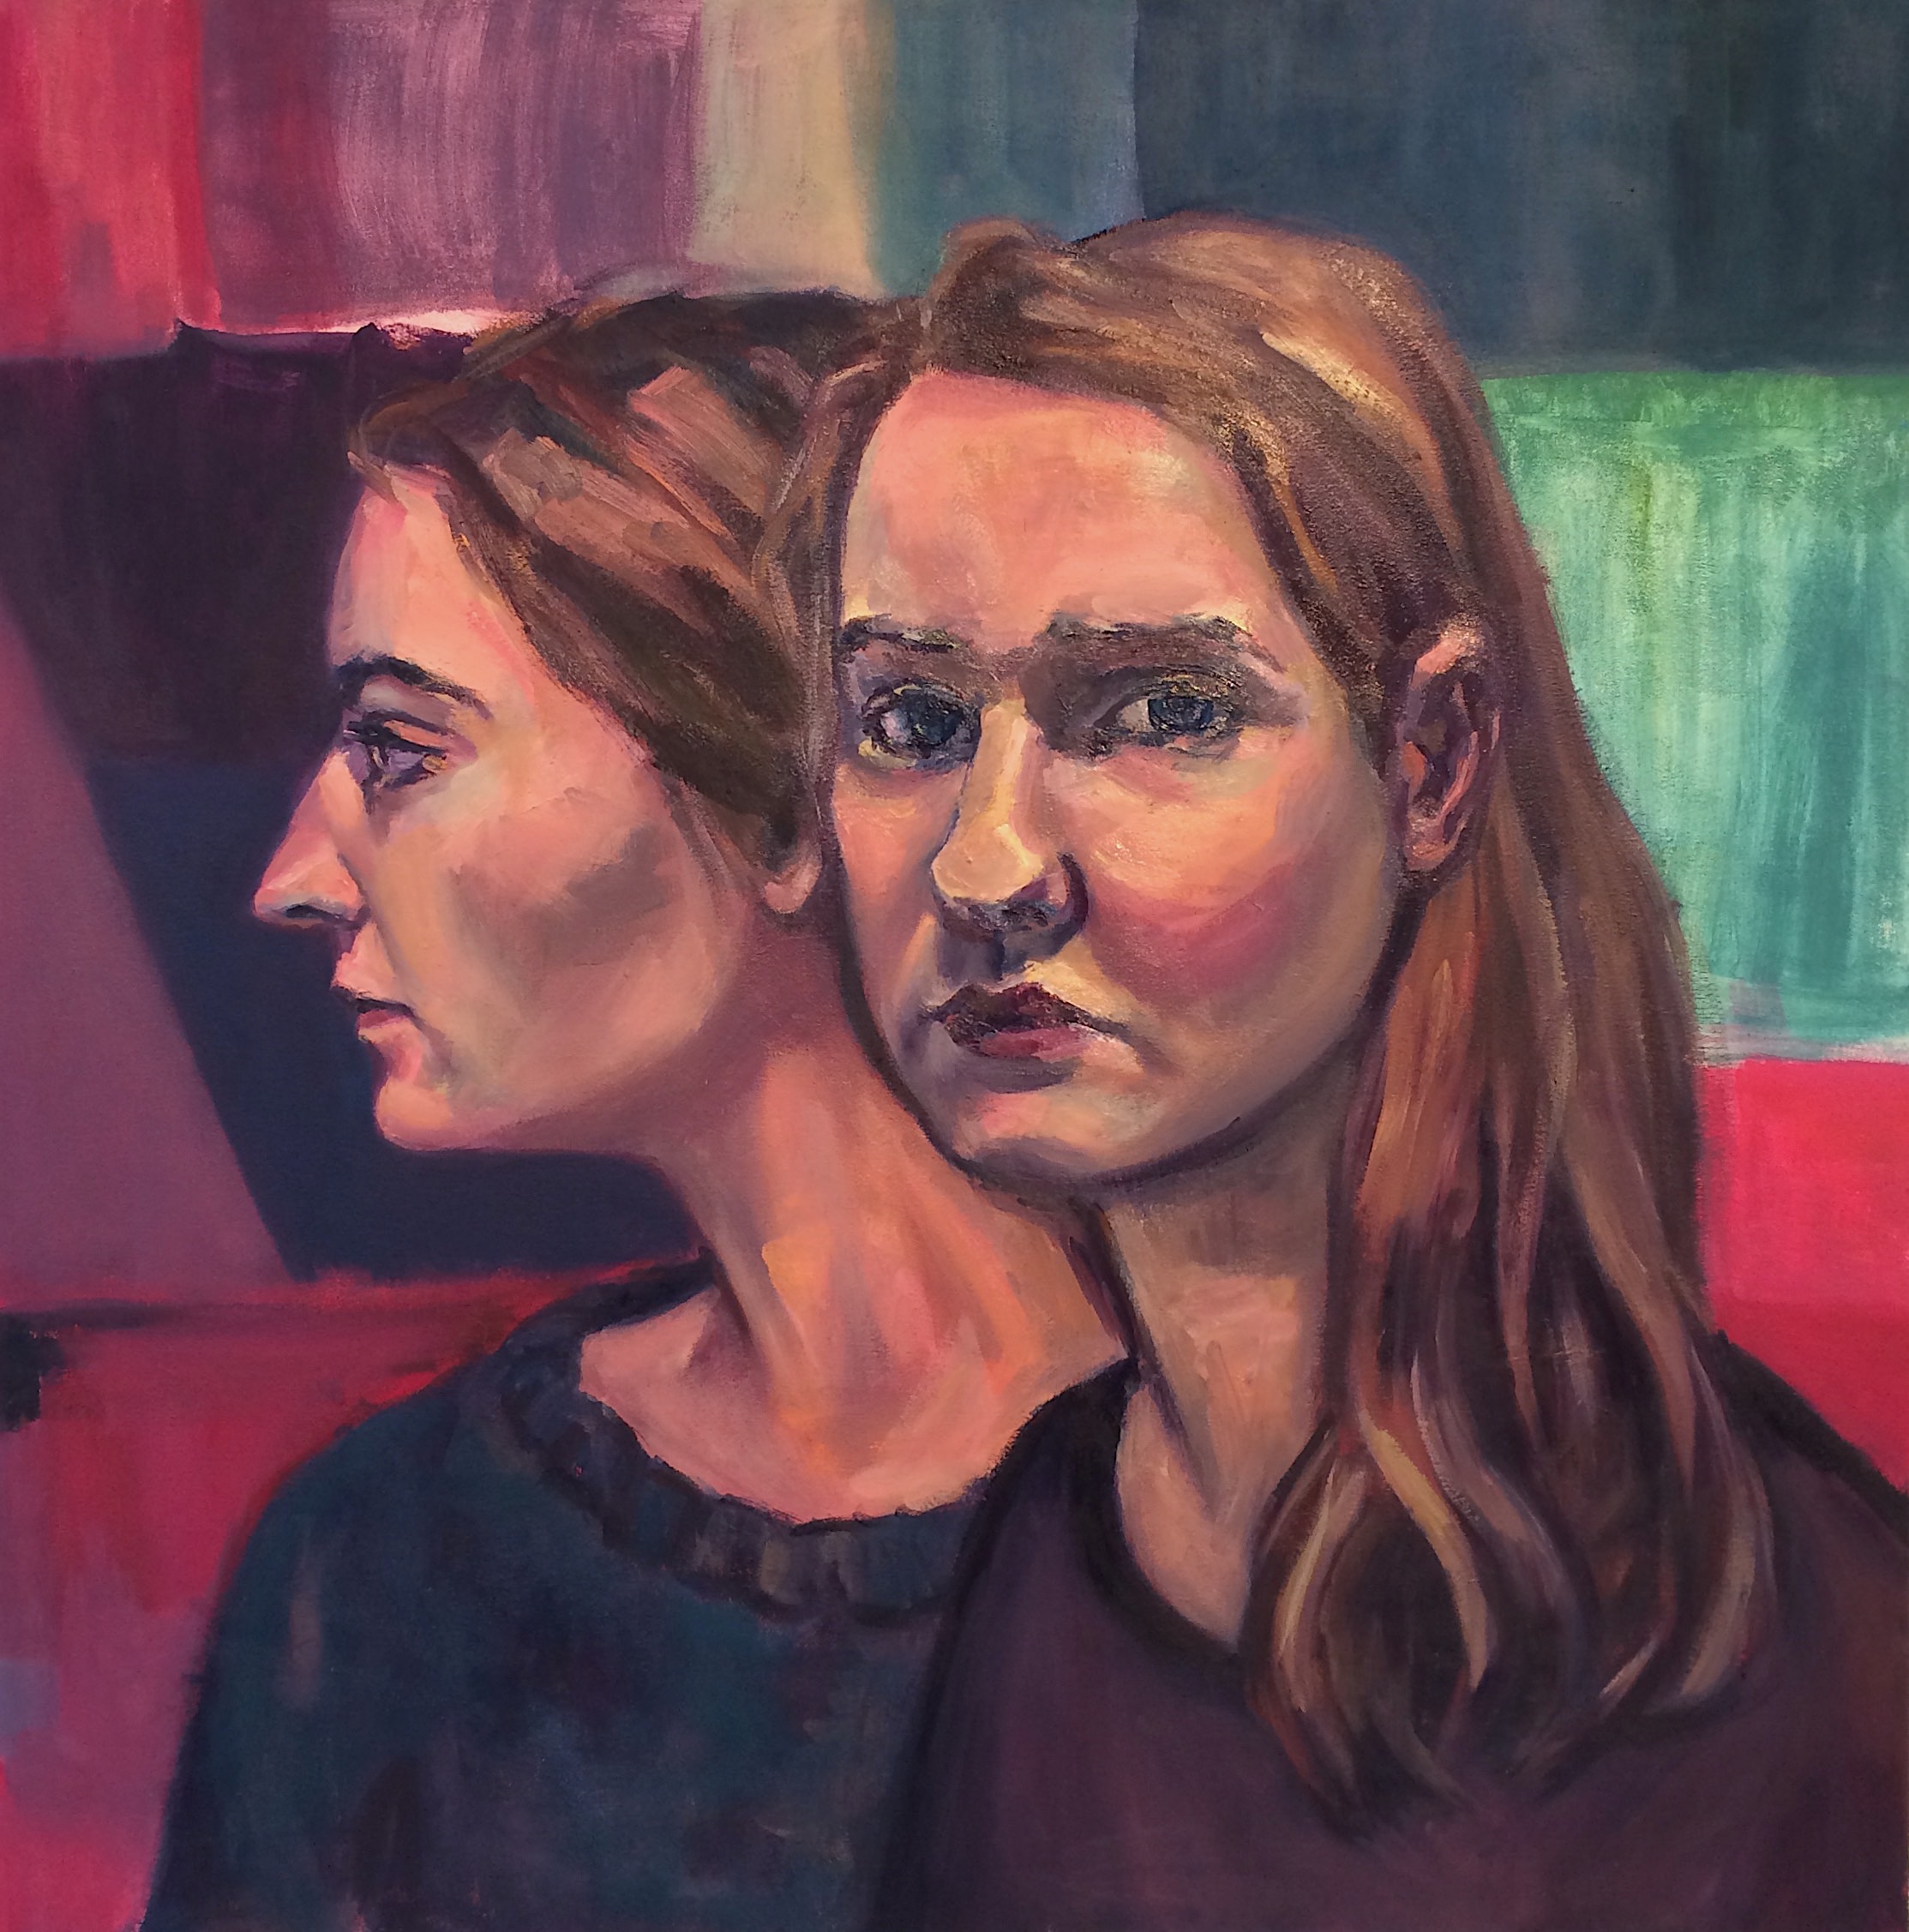 sisters, after Prudence Heward's "Immigrants"